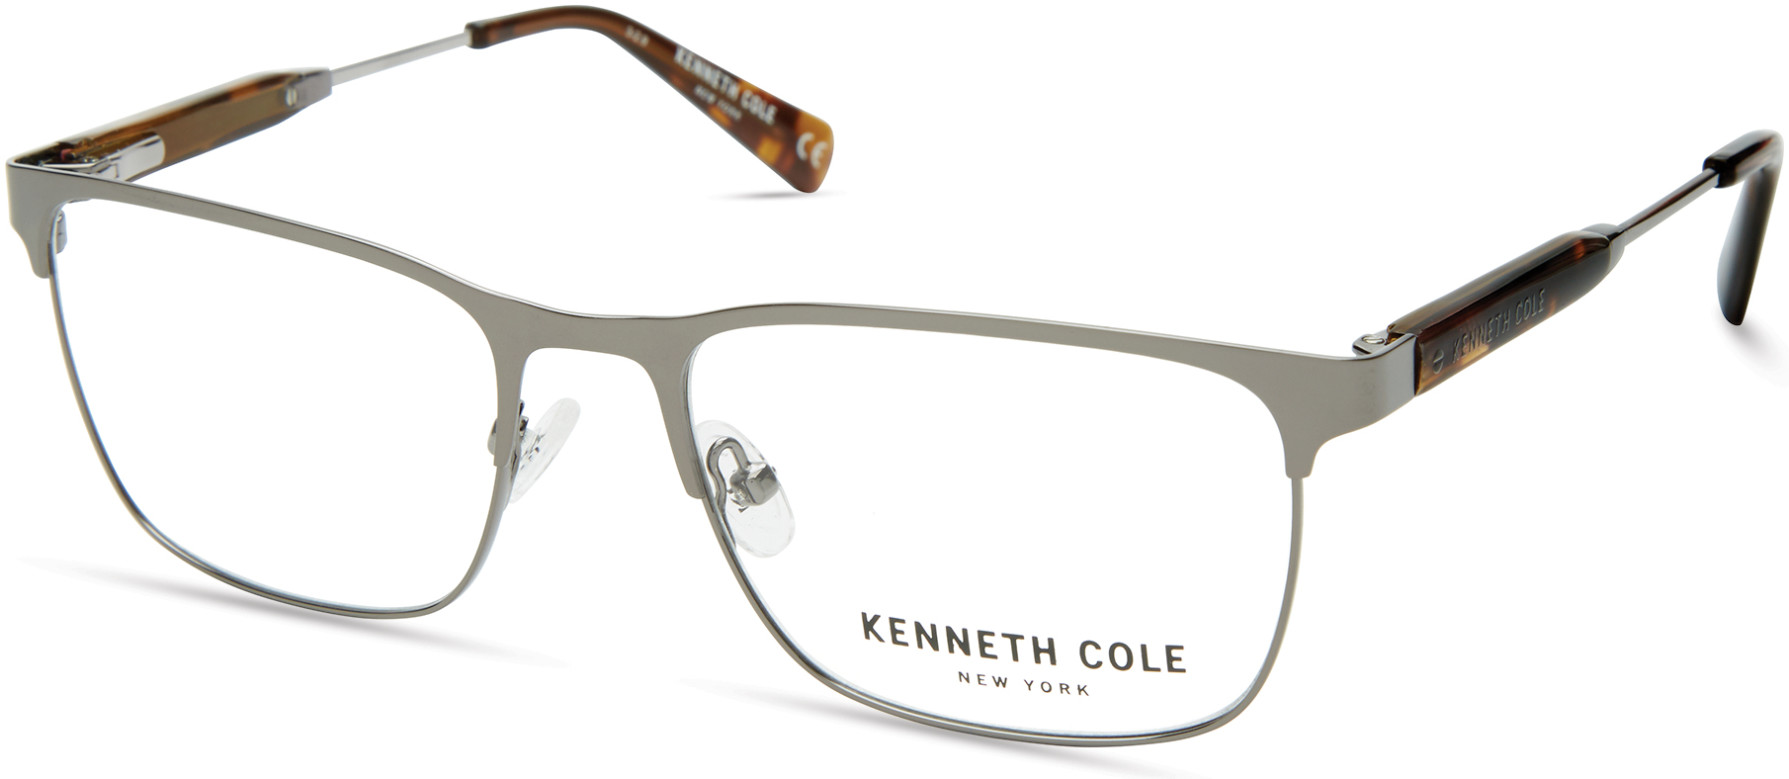 KENNETH COLE NY 0312 008